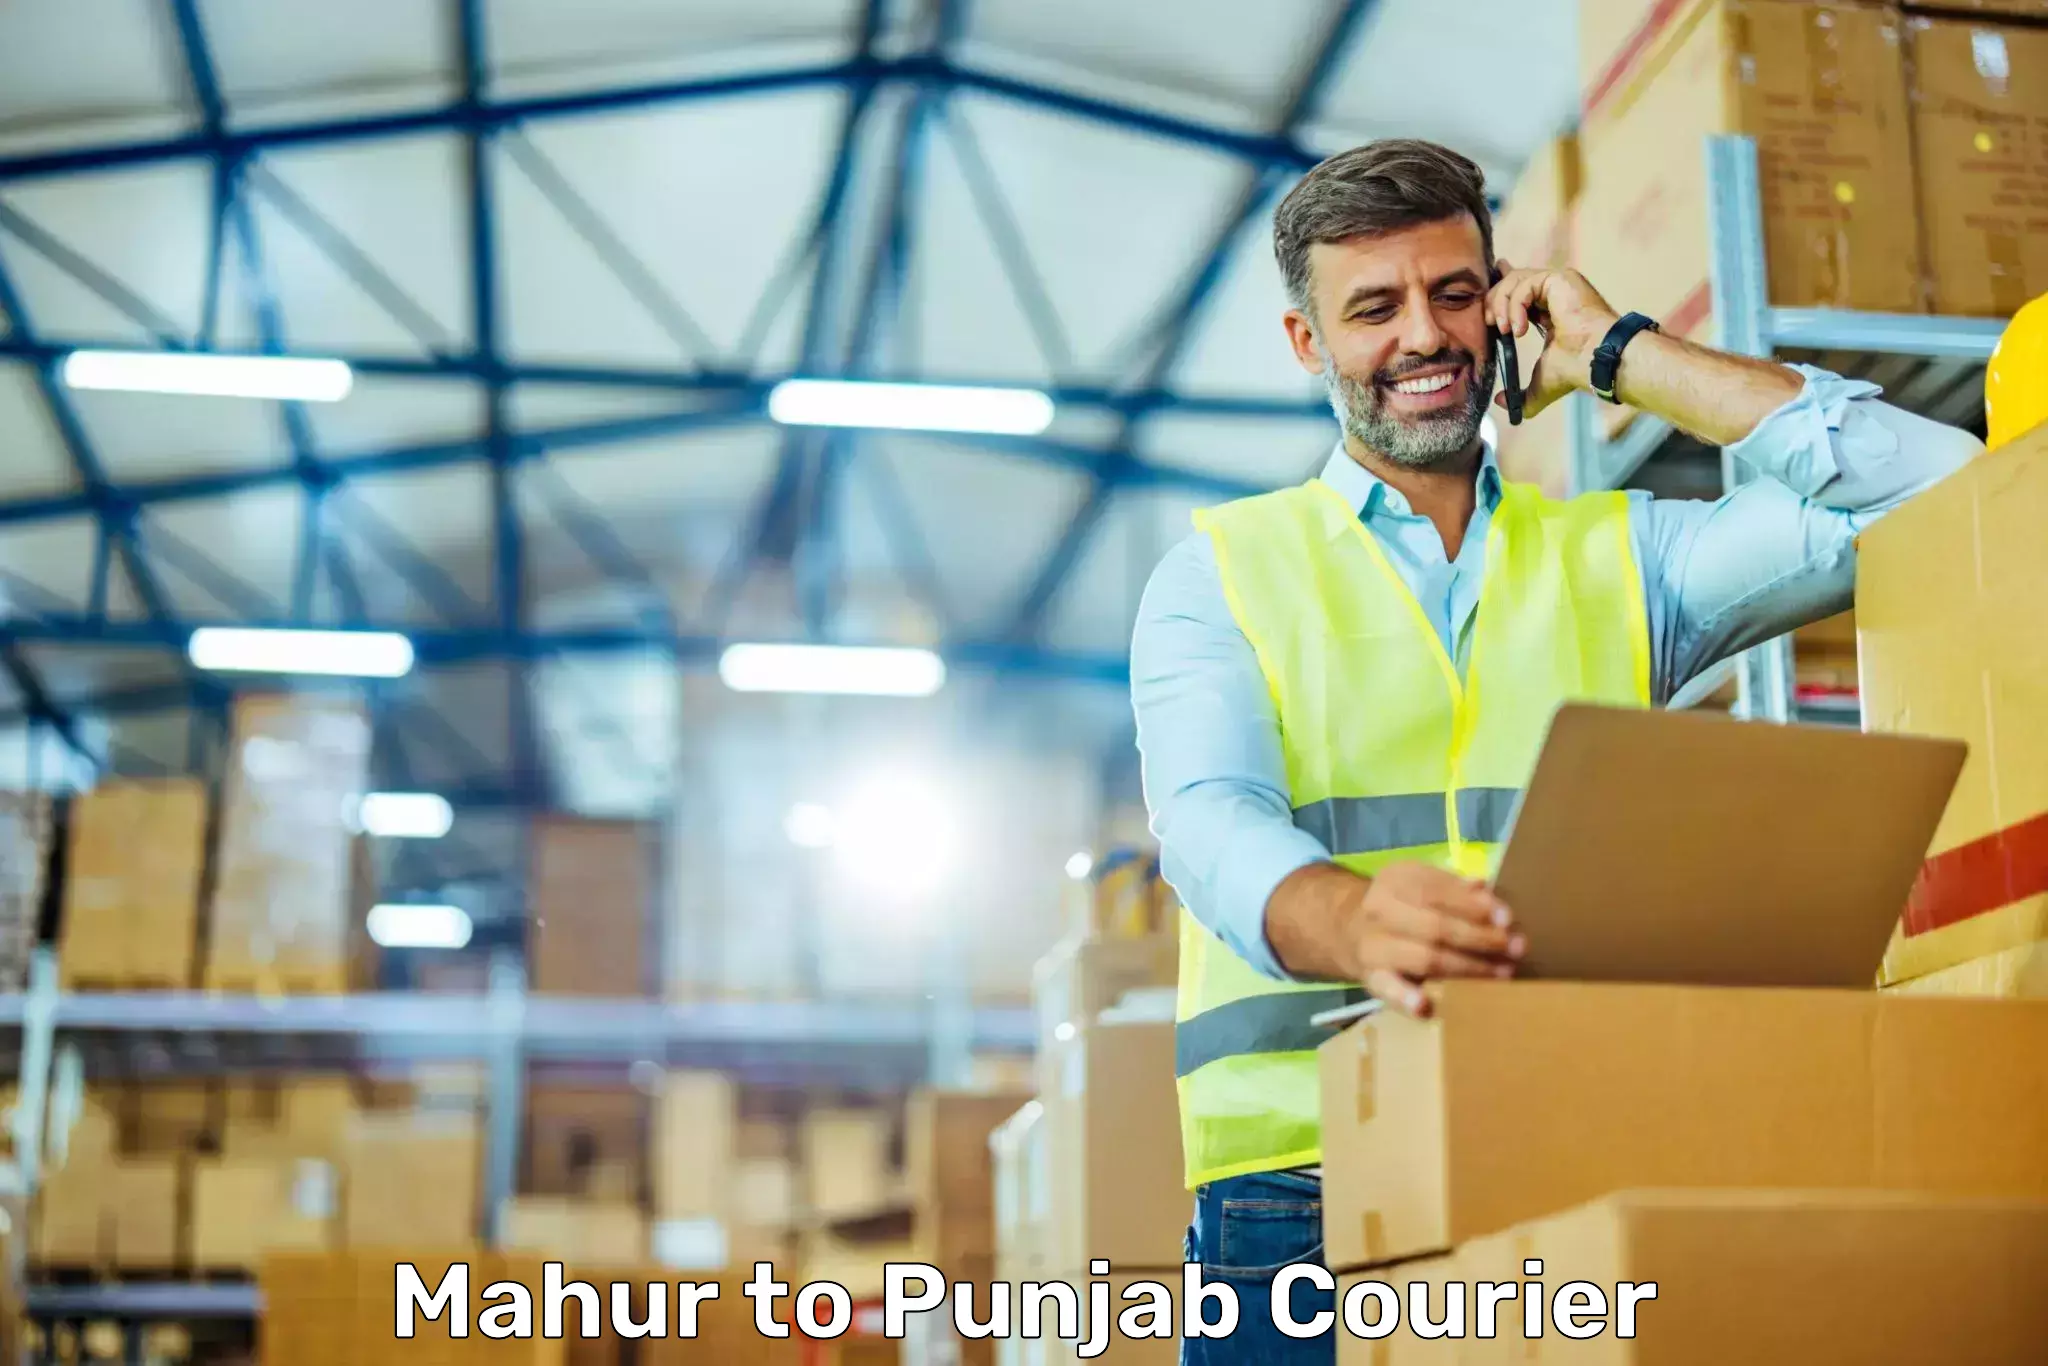 State-of-the-art courier technology Mahur to Punjab